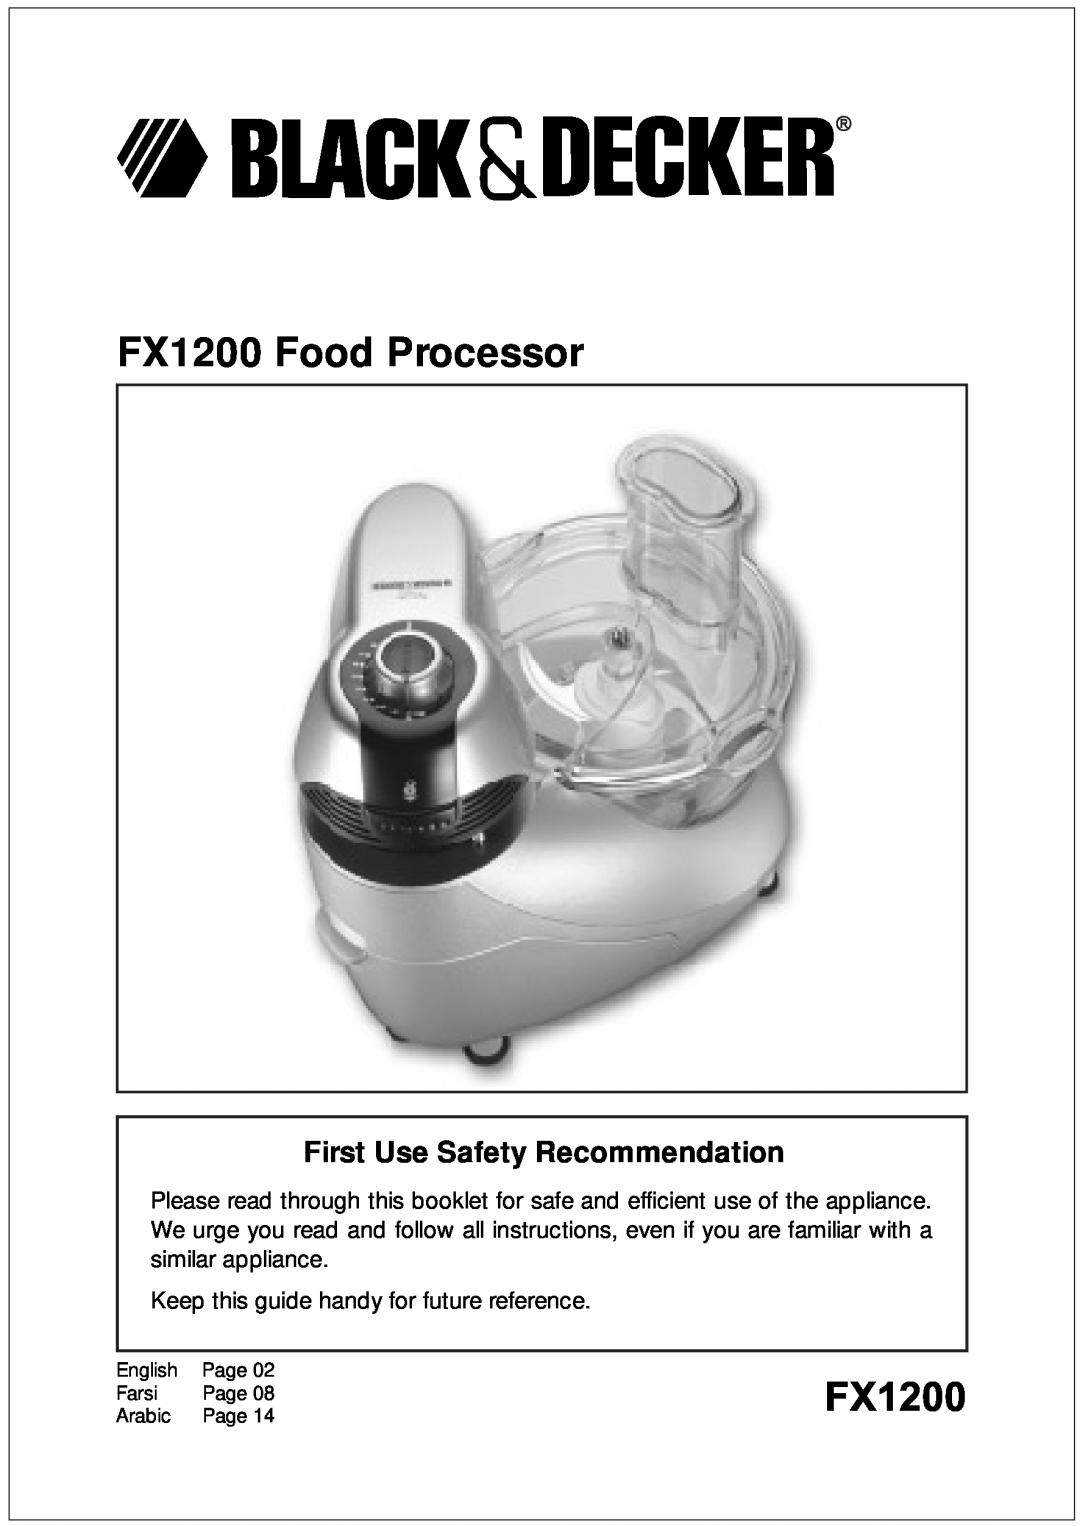 Black & Decker manual Keep this guide handy for future reference, FX1200 Food Processor 